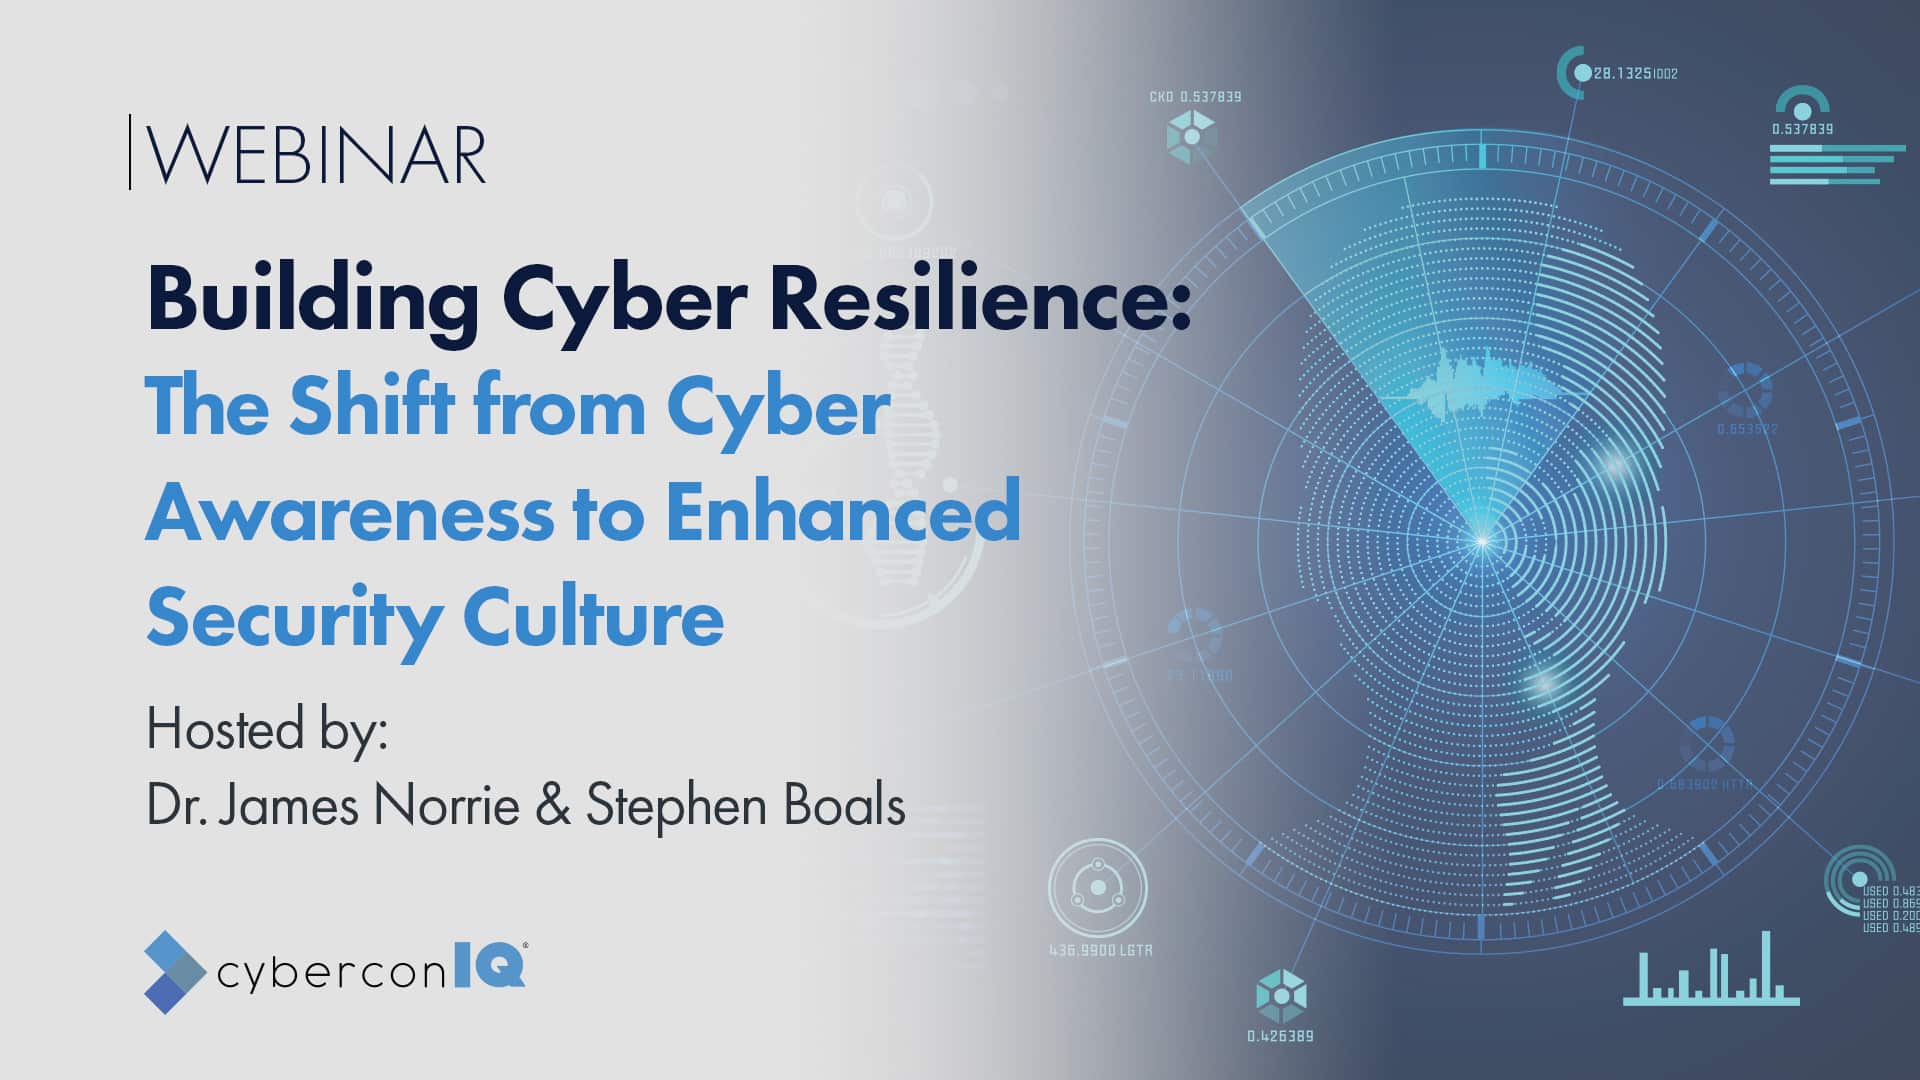 Webinar - Building Cyber Resilience - The Shift from Cyber Awareness to Enhanced Security Culture